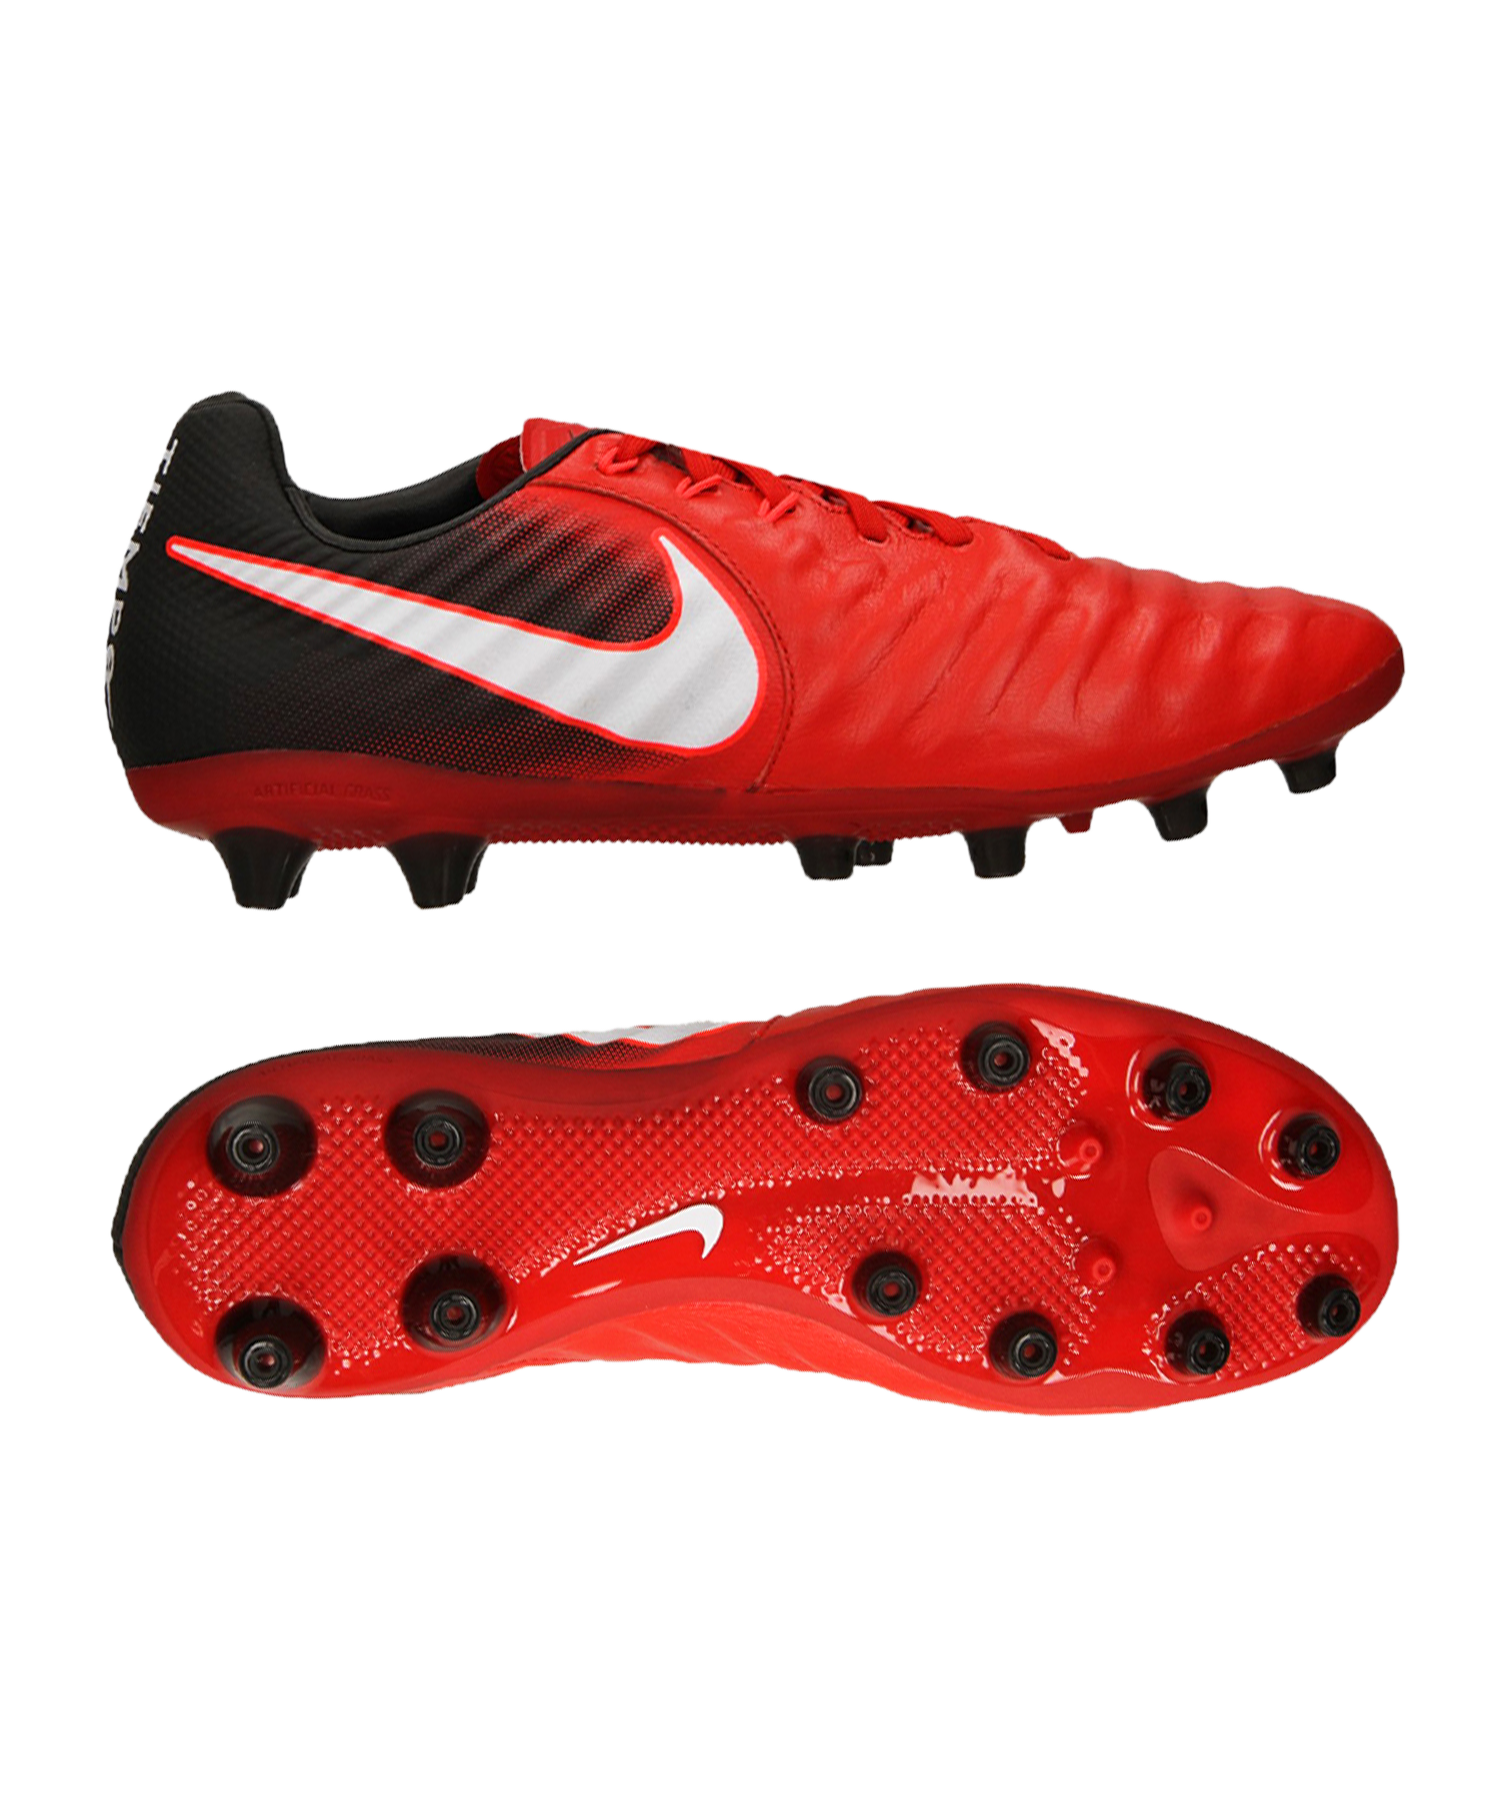 Tiempo Legacy III AG-Pro - Red